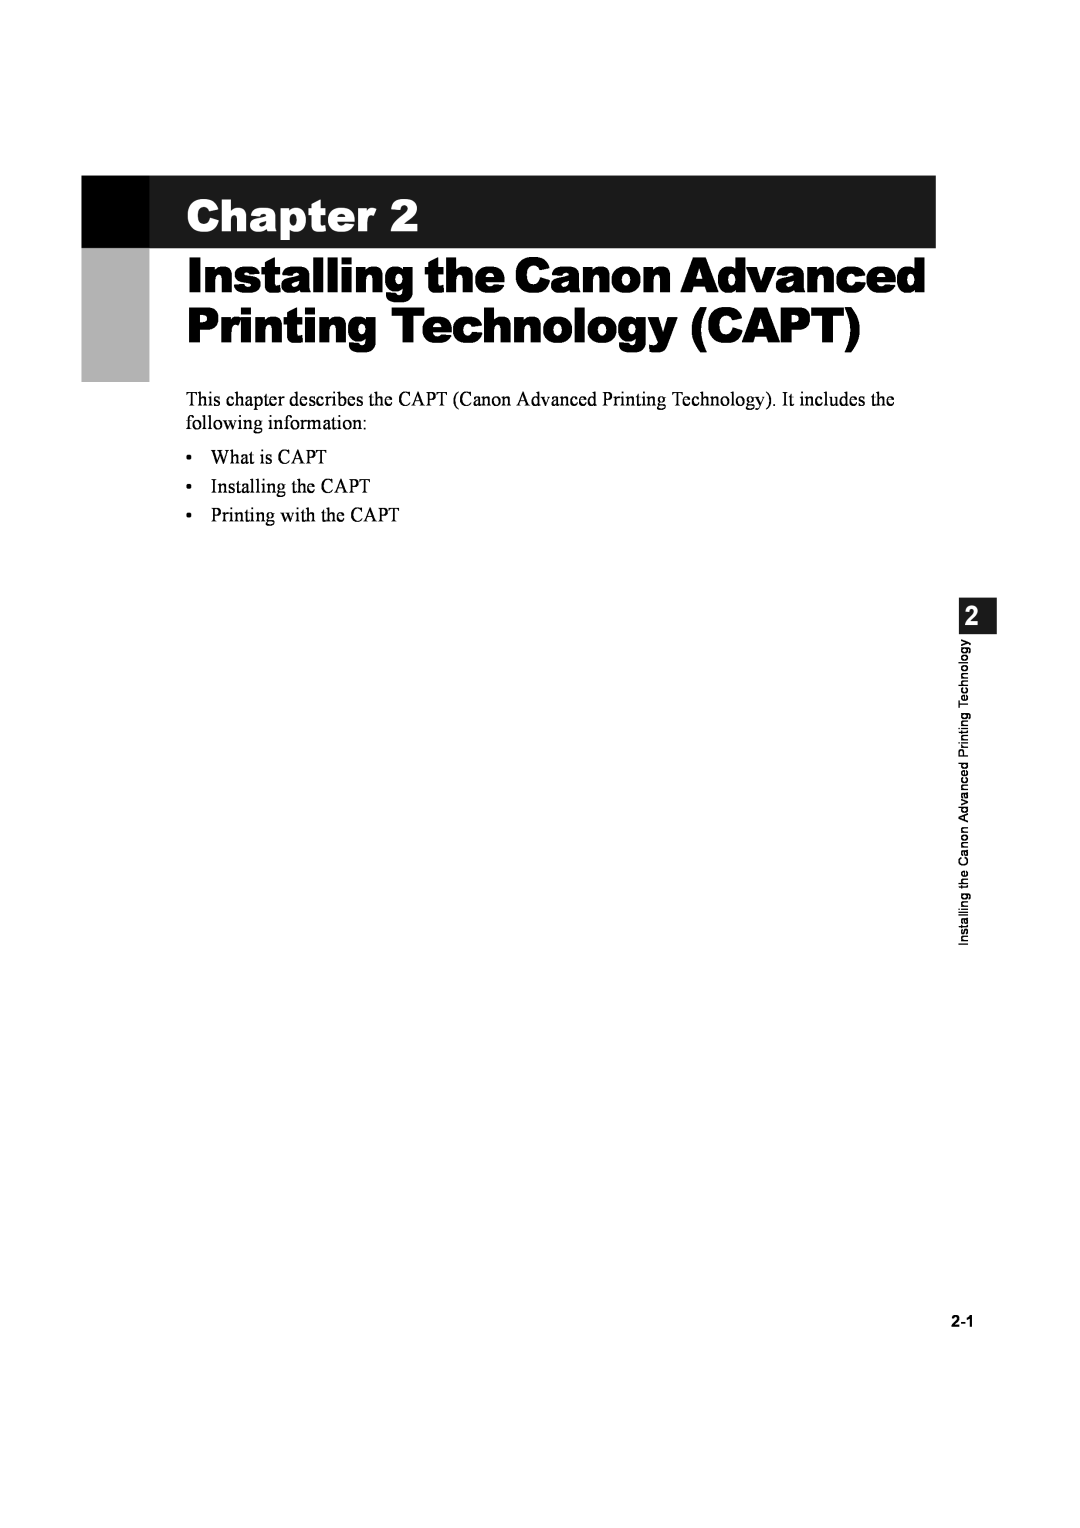 Canon D600 manual Chapter, Installing the Canon Advanced Printing Technology CAPT 